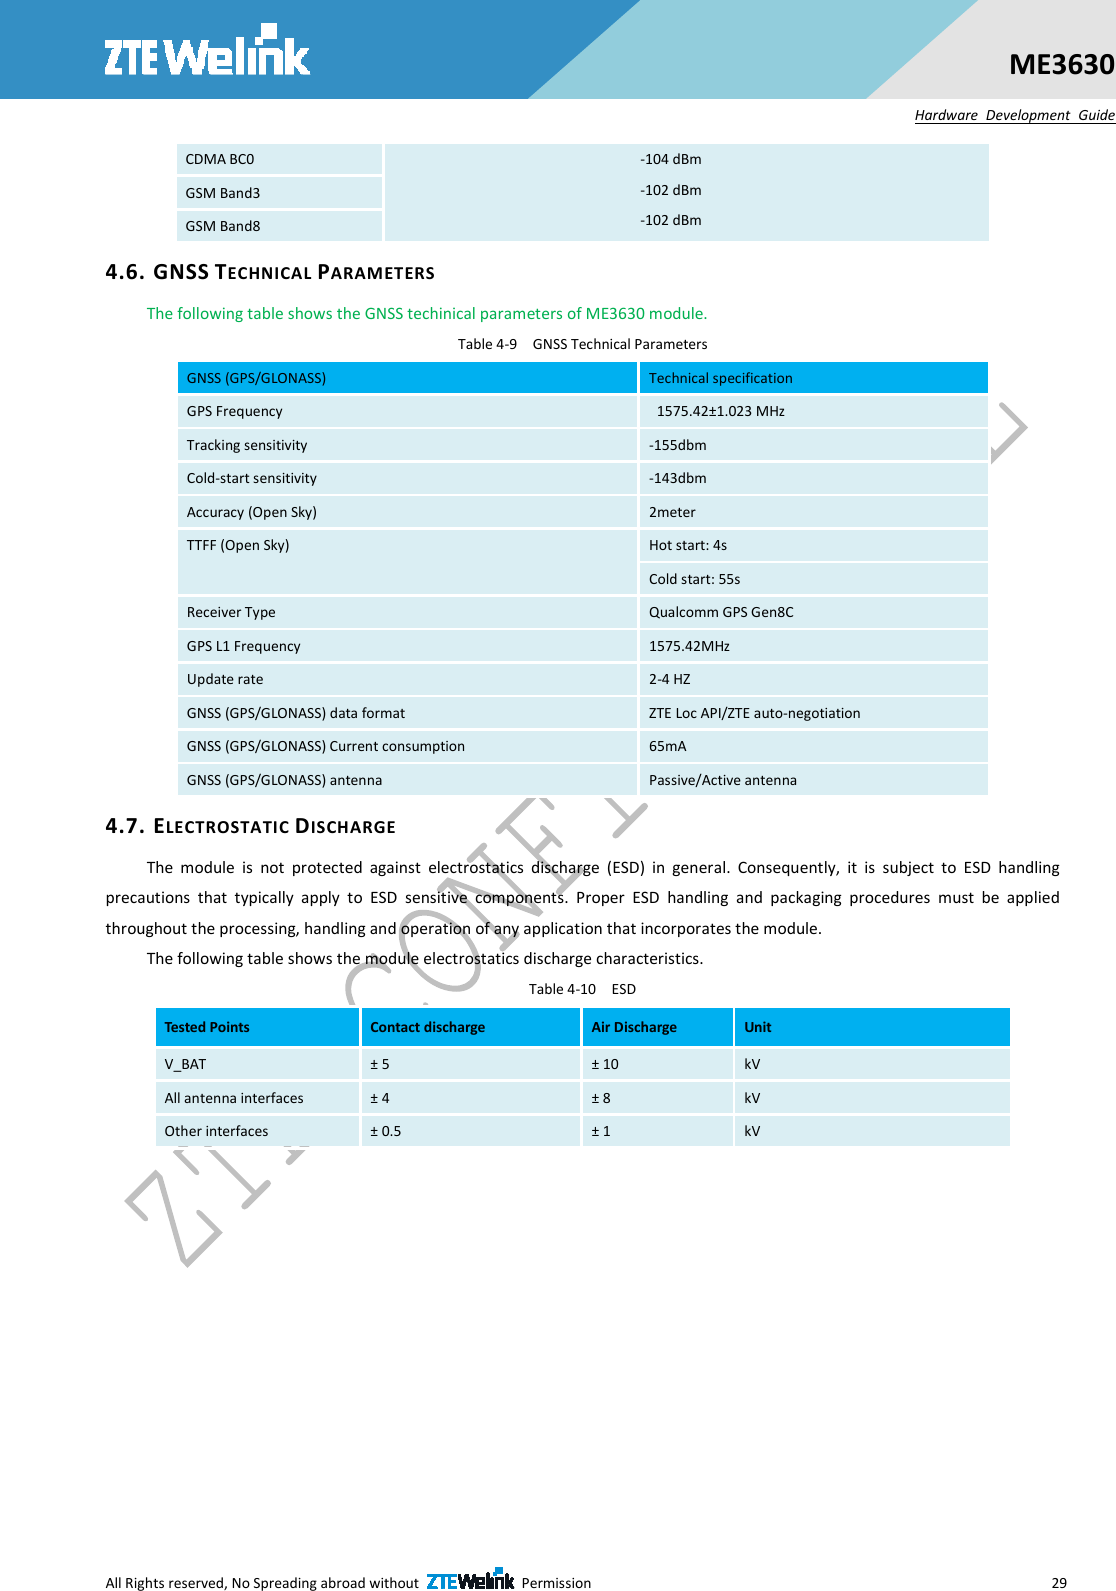  All Rights reserved, No Spreading abroad without    Permission      29 ME3630 Hardware  Development  Guide CDMA BC0  -104 dBm -102 dBm -102 dBm GSM Band3 GSM Band8 4.6. GNSS TECHNICAL PARAMETERS The following table shows the GNSS techinical parameters of ME3630 module. Table 4-9    GNSS Technical Parameters GNSS (GPS/GLONASS)    Technical specification   GPS Frequency    1575.42±1.023 MHz   Tracking sensitivity  -155dbm Cold-start sensitivity  -143dbm Accuracy (Open Sky)  2meter TTFF (Open Sky)    Hot start: 4s Cold start: 55s Receiver Type    Qualcomm GPS Gen8C  GPS L1 Frequency  1575.42MHz Update rate  2-4 HZ  GNSS (GPS/GLONASS) data format  ZTE Loc API/ZTE auto-negotiation GNSS (GPS/GLONASS) Current consumption  65mA GNSS (GPS/GLONASS) antenna    Passive/Active antenna 4.7. ELECTROSTATIC DISCHARGE The  module  is  not  protected  against  electrostatics  discharge  (ESD)  in  general.  Consequently,  it  is  subject  to  ESD  handling precautions  that  typically  apply  to  ESD  sensitive  components.  Proper  ESD  handling  and  packaging  procedures  must  be  applied throughout the processing, handling and operation of any application that incorporates the module. The following table shows the module electrostatics discharge characteristics. Table 4-10    ESD Tested Points  Contact discharge  Air Discharge  Unit V_BAT  ± 5  ± 10  kV All antenna interfaces  ± 4  ± 8  kV Other interfaces  ± 0.5  ± 1  kV 